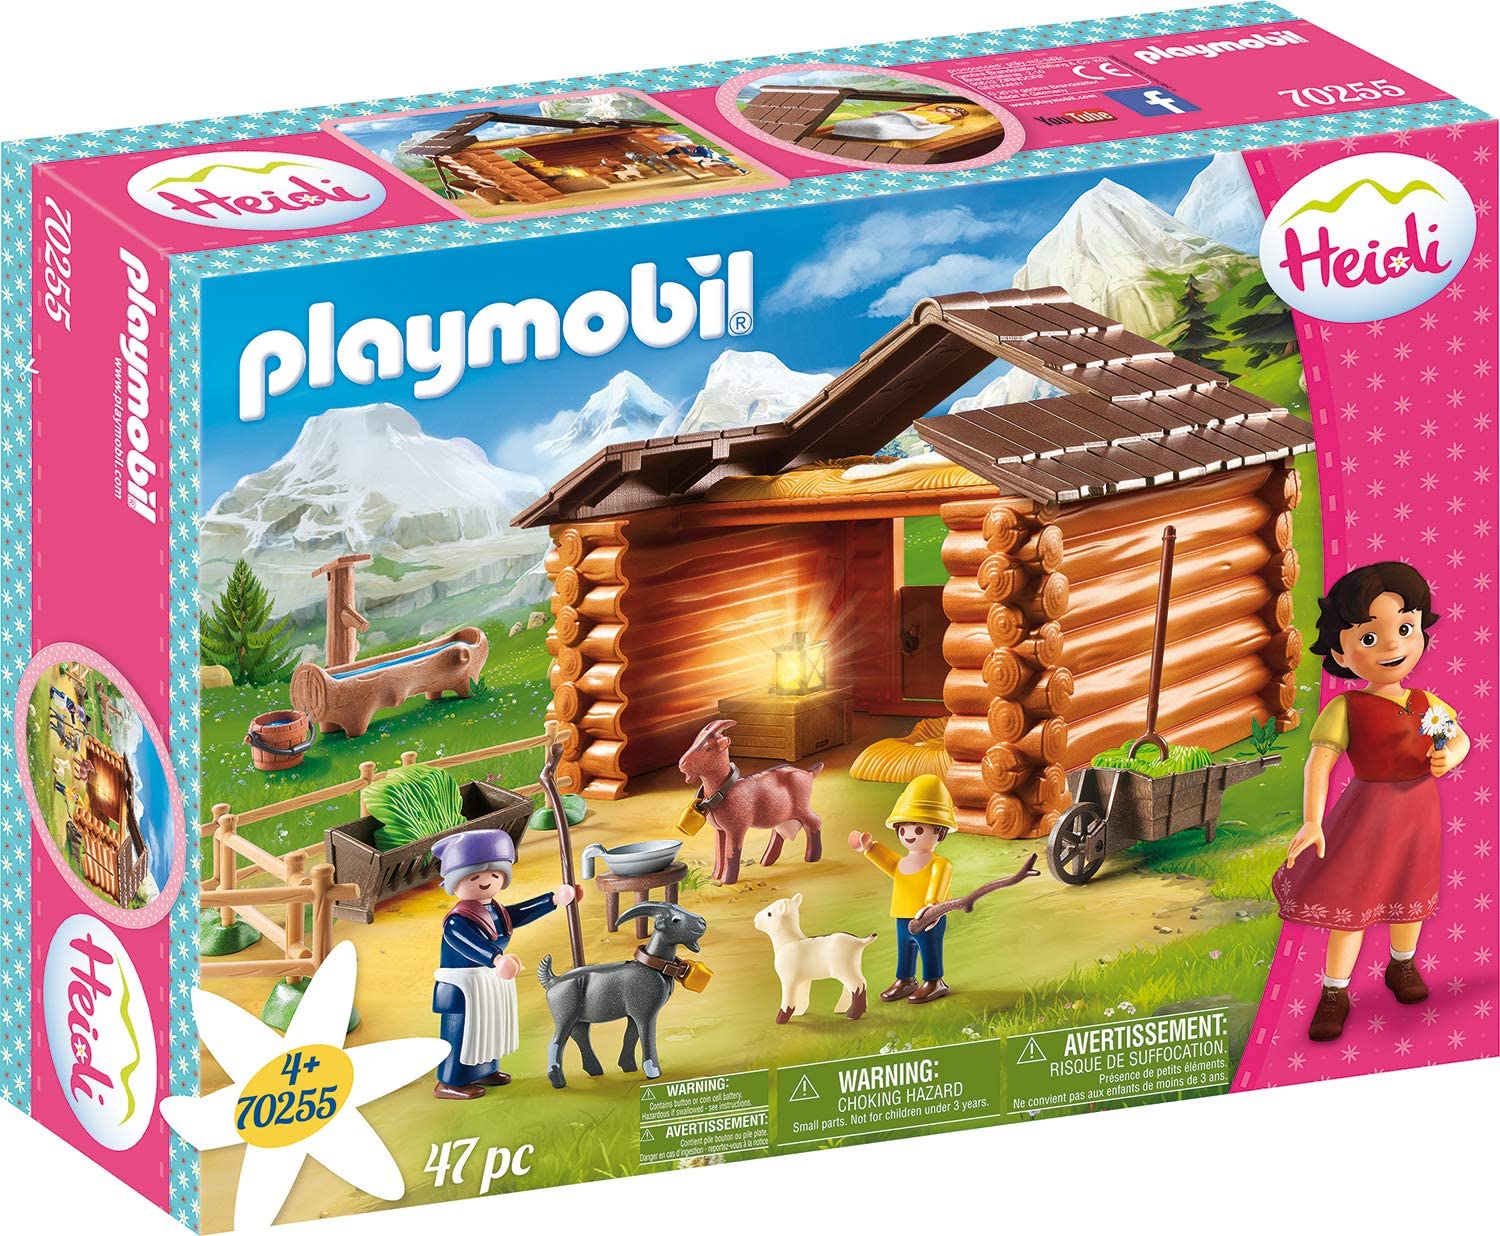 Playmobil, Heidi, 70255, Peters Goat Shed with Light Effect, Aged 4 Years a